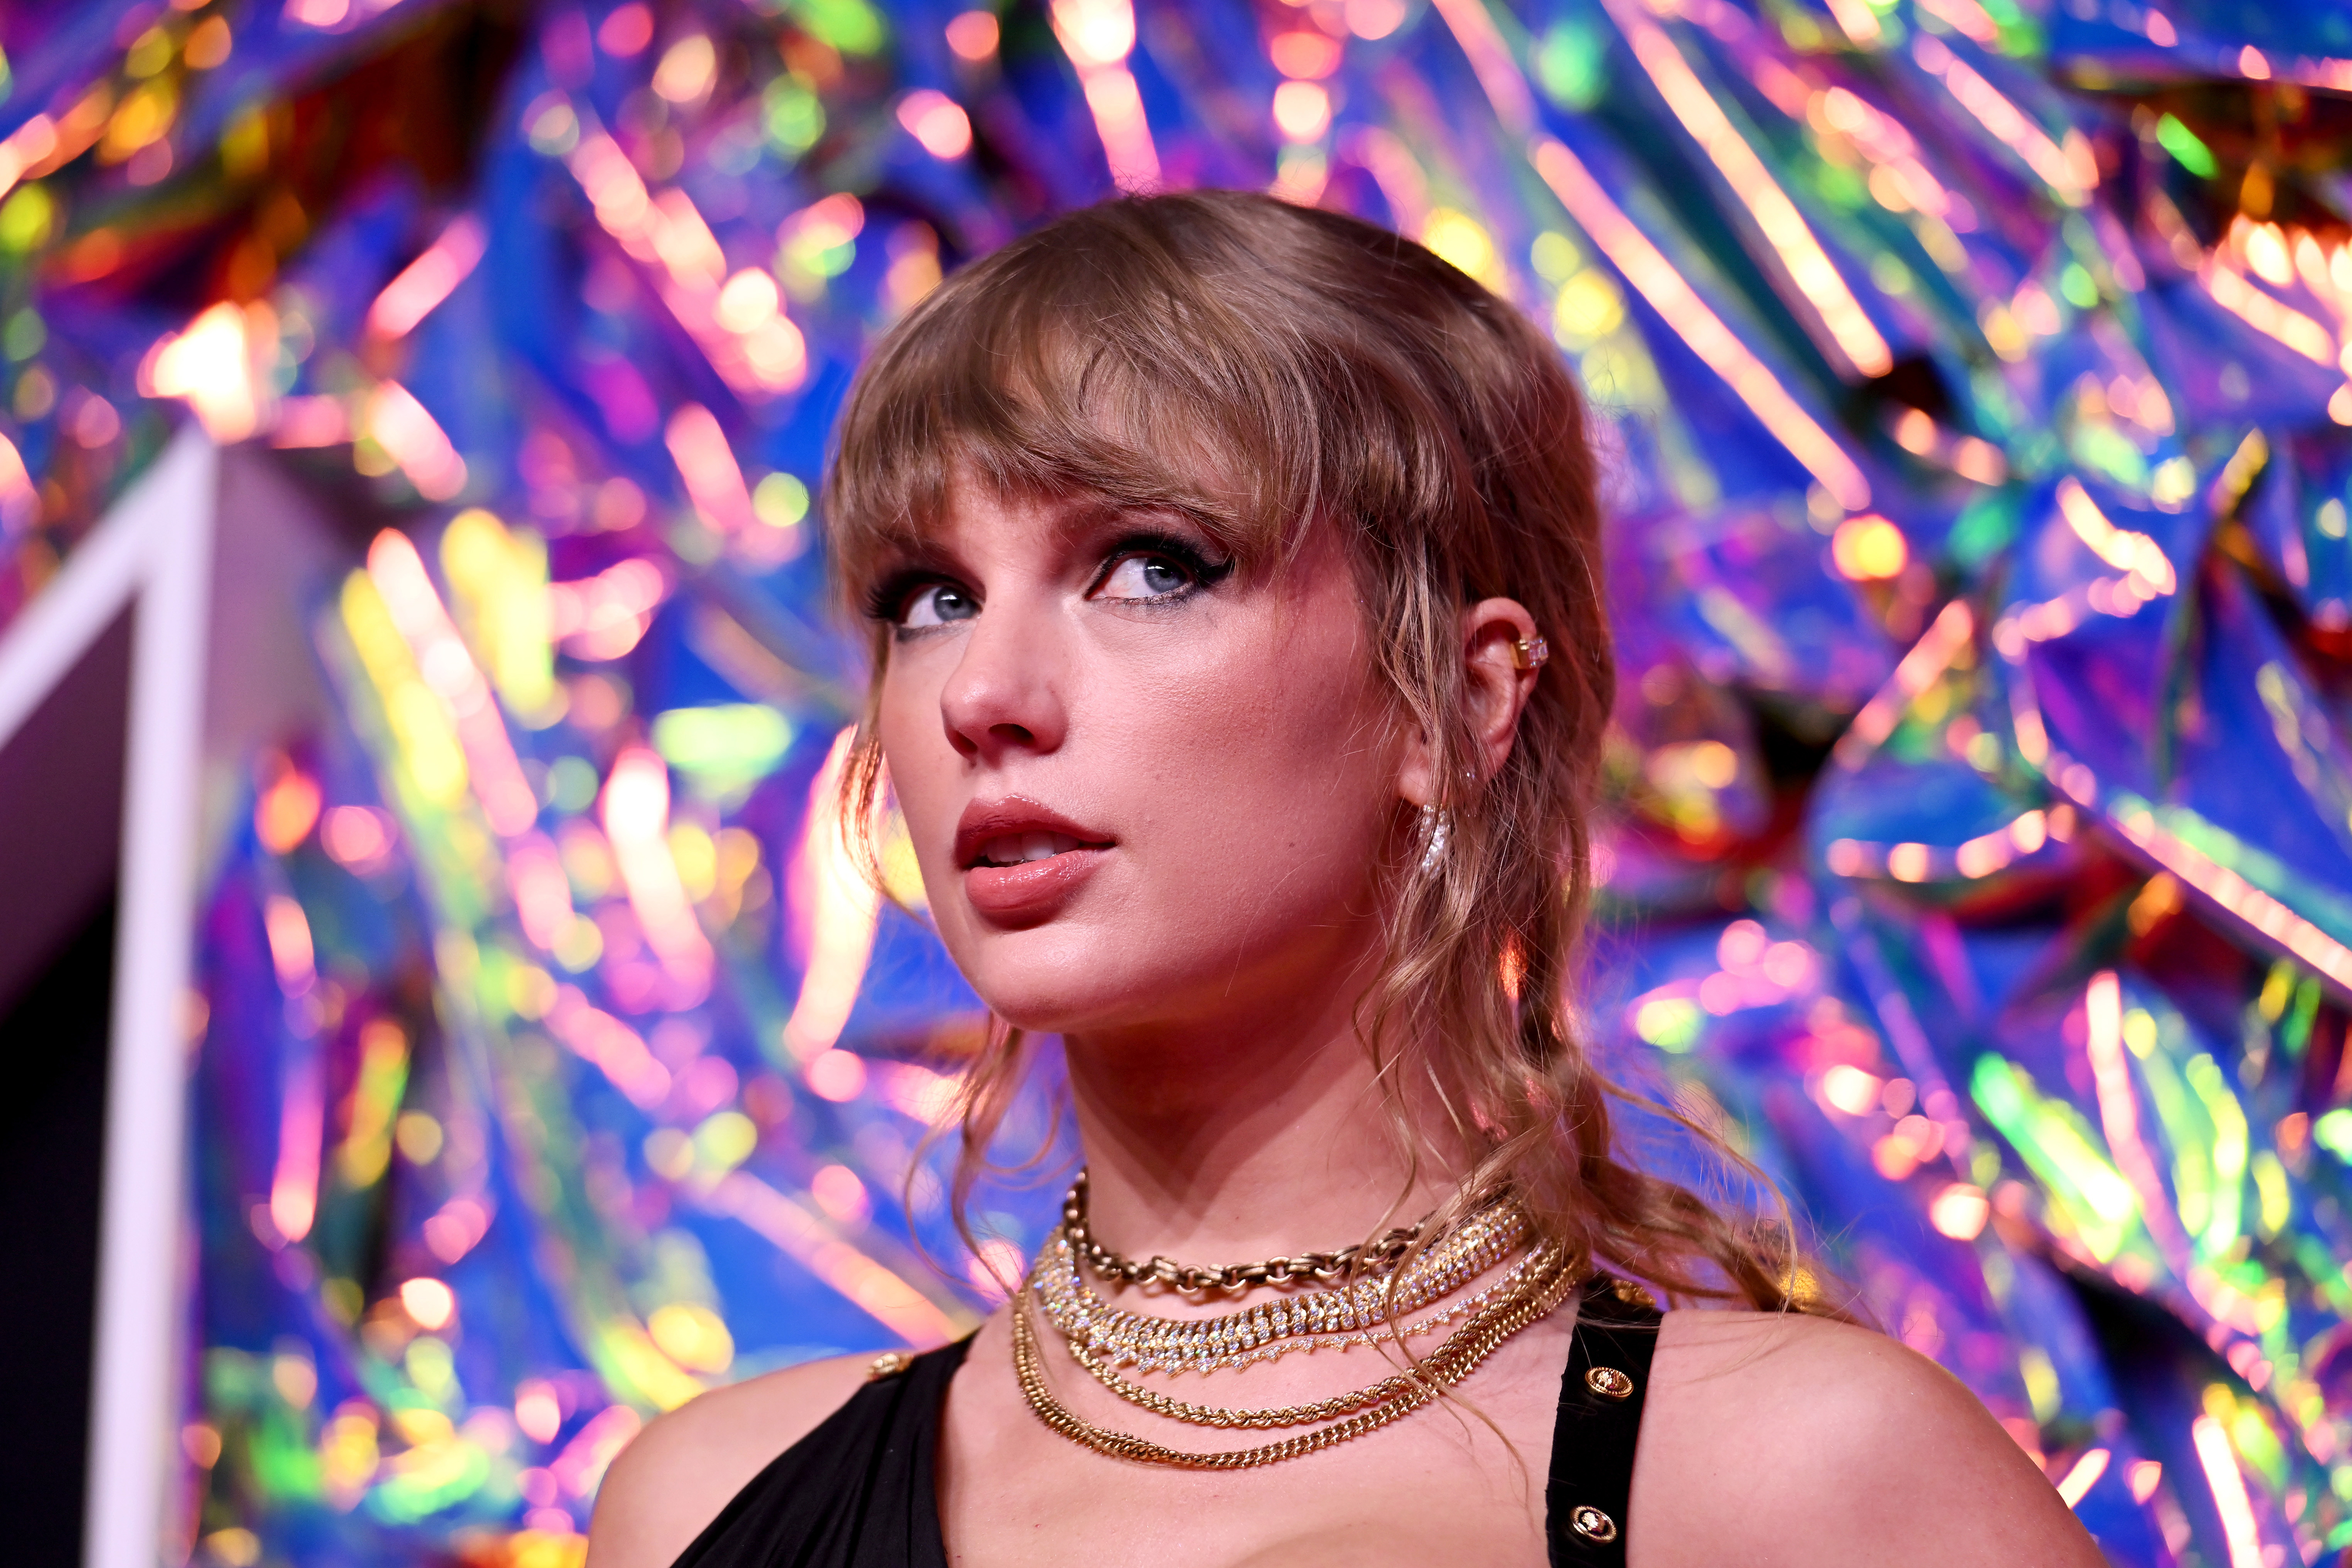 Close-up of Taylor wearing many necklaces and multicolored lights behind her